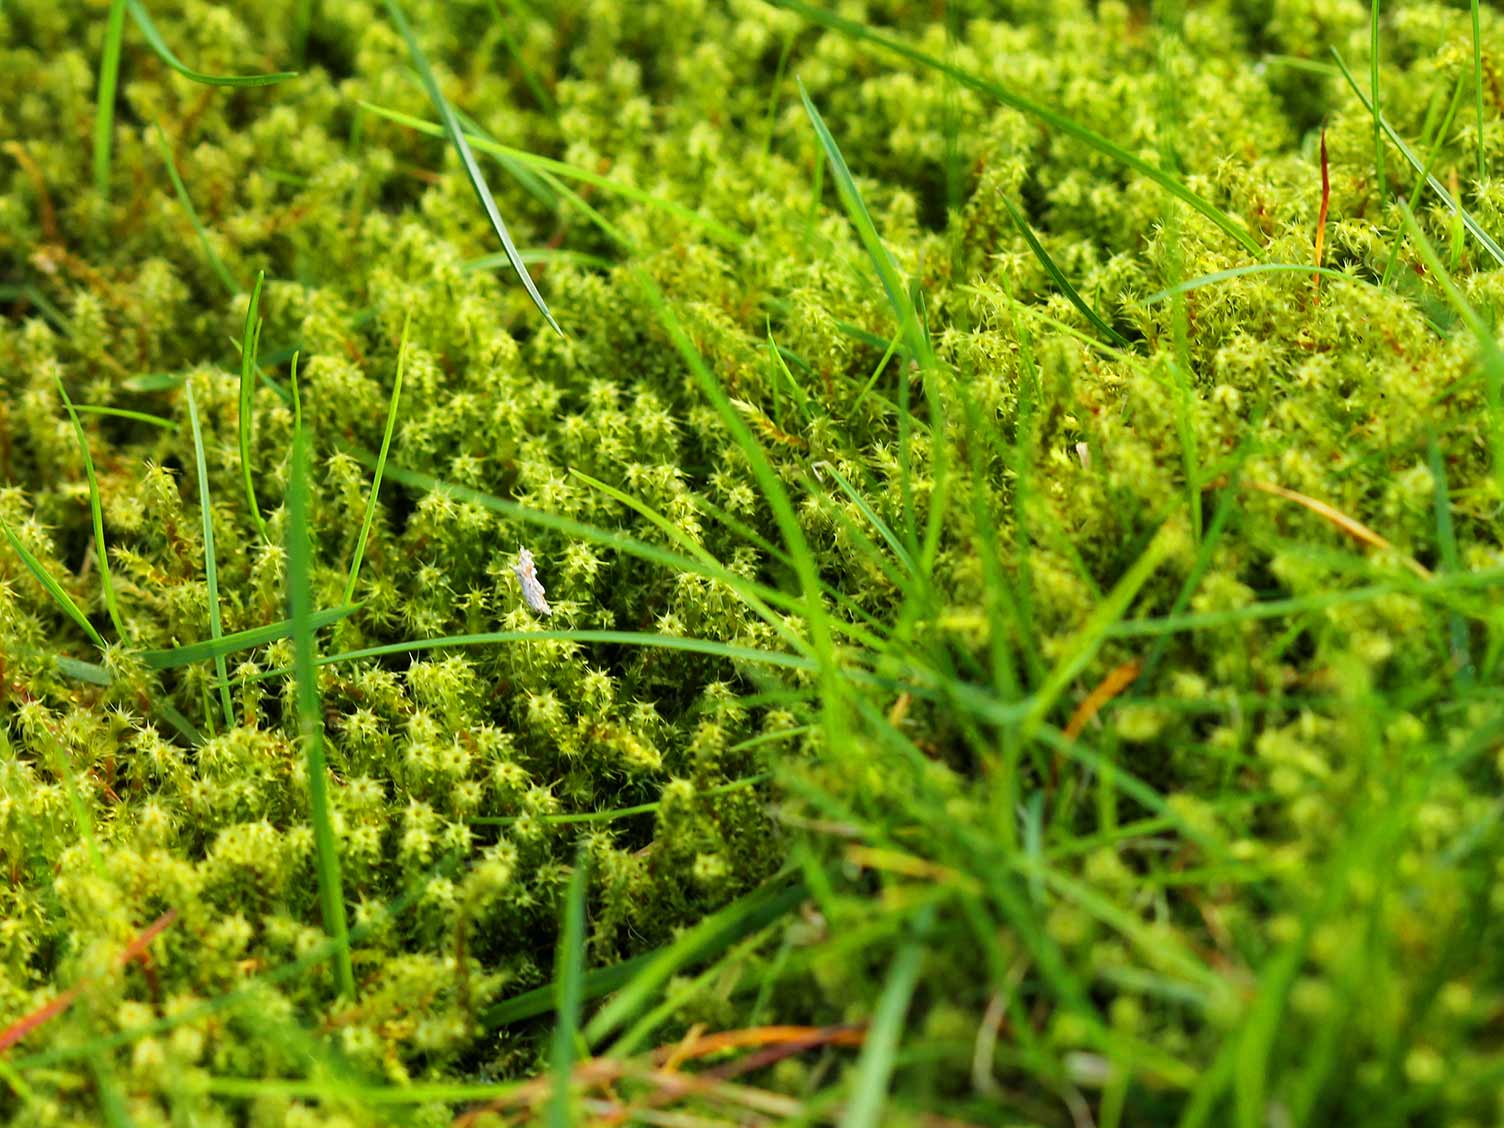  Control and prevent lawn moss